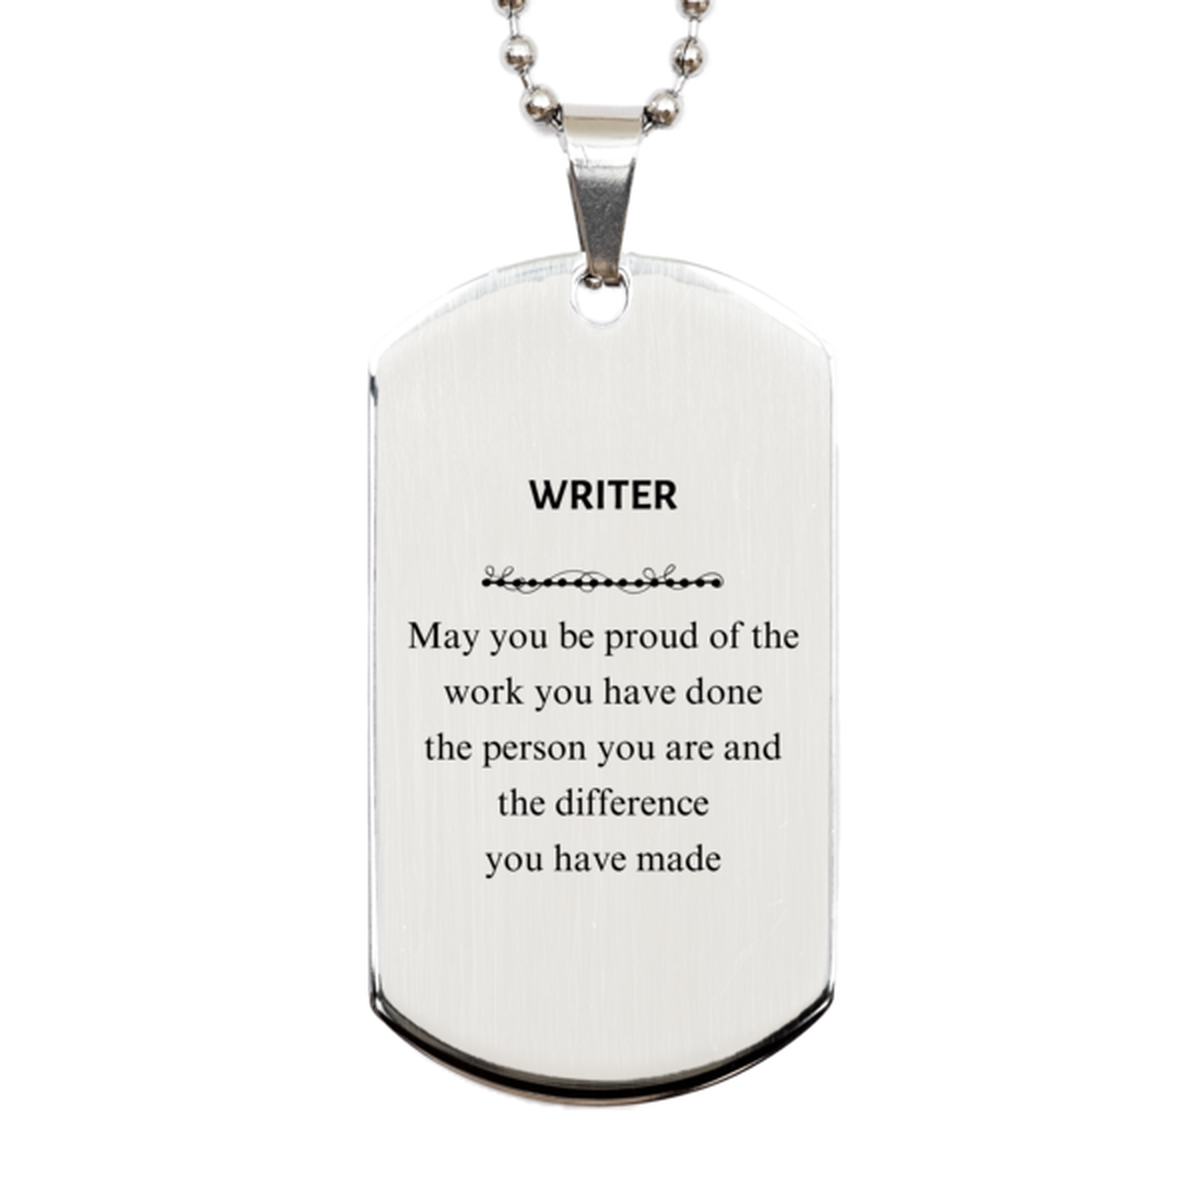 Writer May you be proud of the work you have done, Retirement Writer Silver Dog Tag for Colleague Appreciation Gifts Amazing for Writer